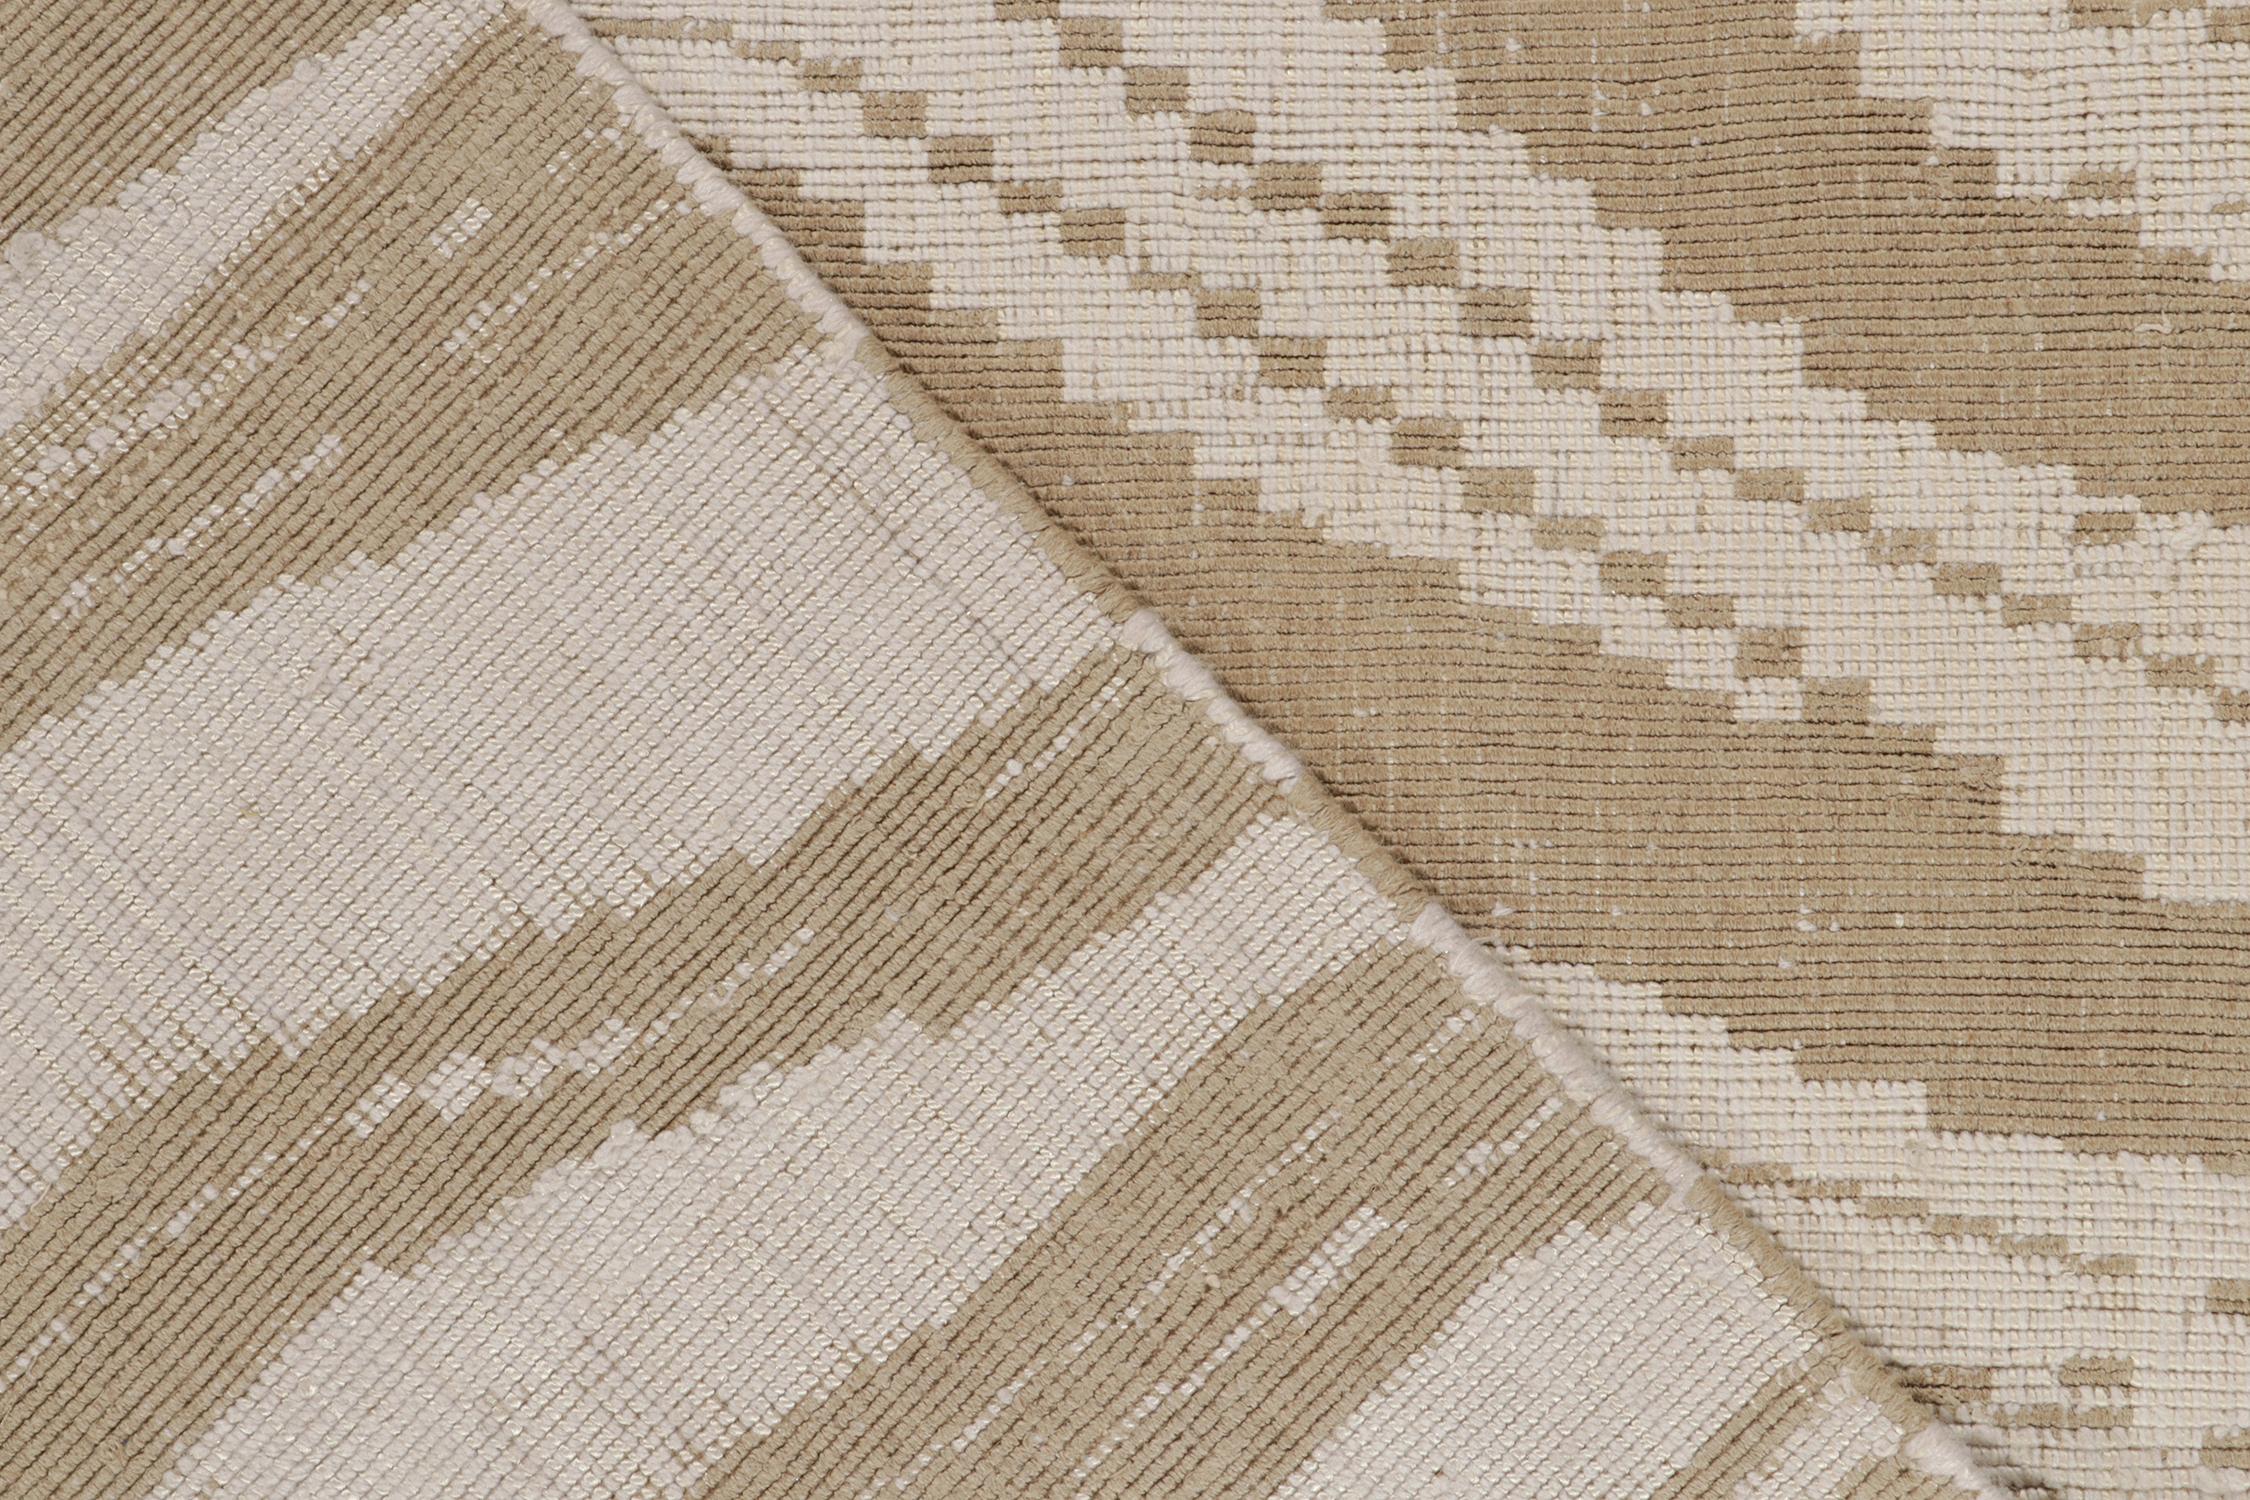 Contemporary Rug & Kilim's Hand-Knotted Abstract Rug in Beige-Brown Wavy Stripes For Sale